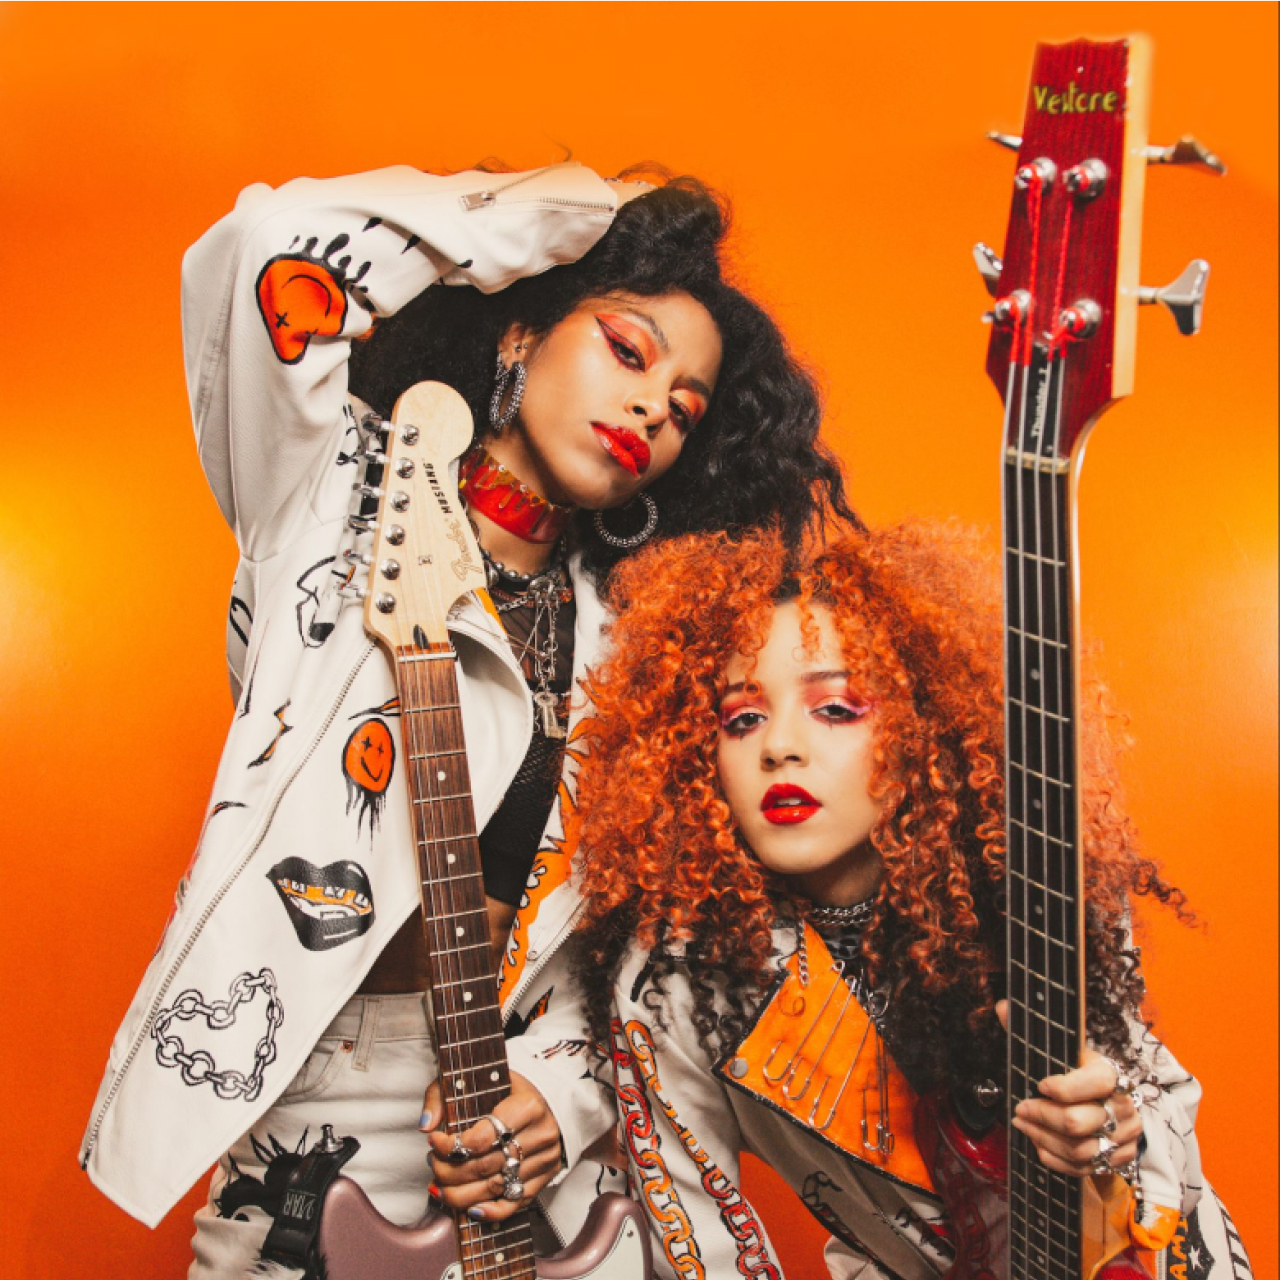 The 'Nova Twins' in front of a orange background.